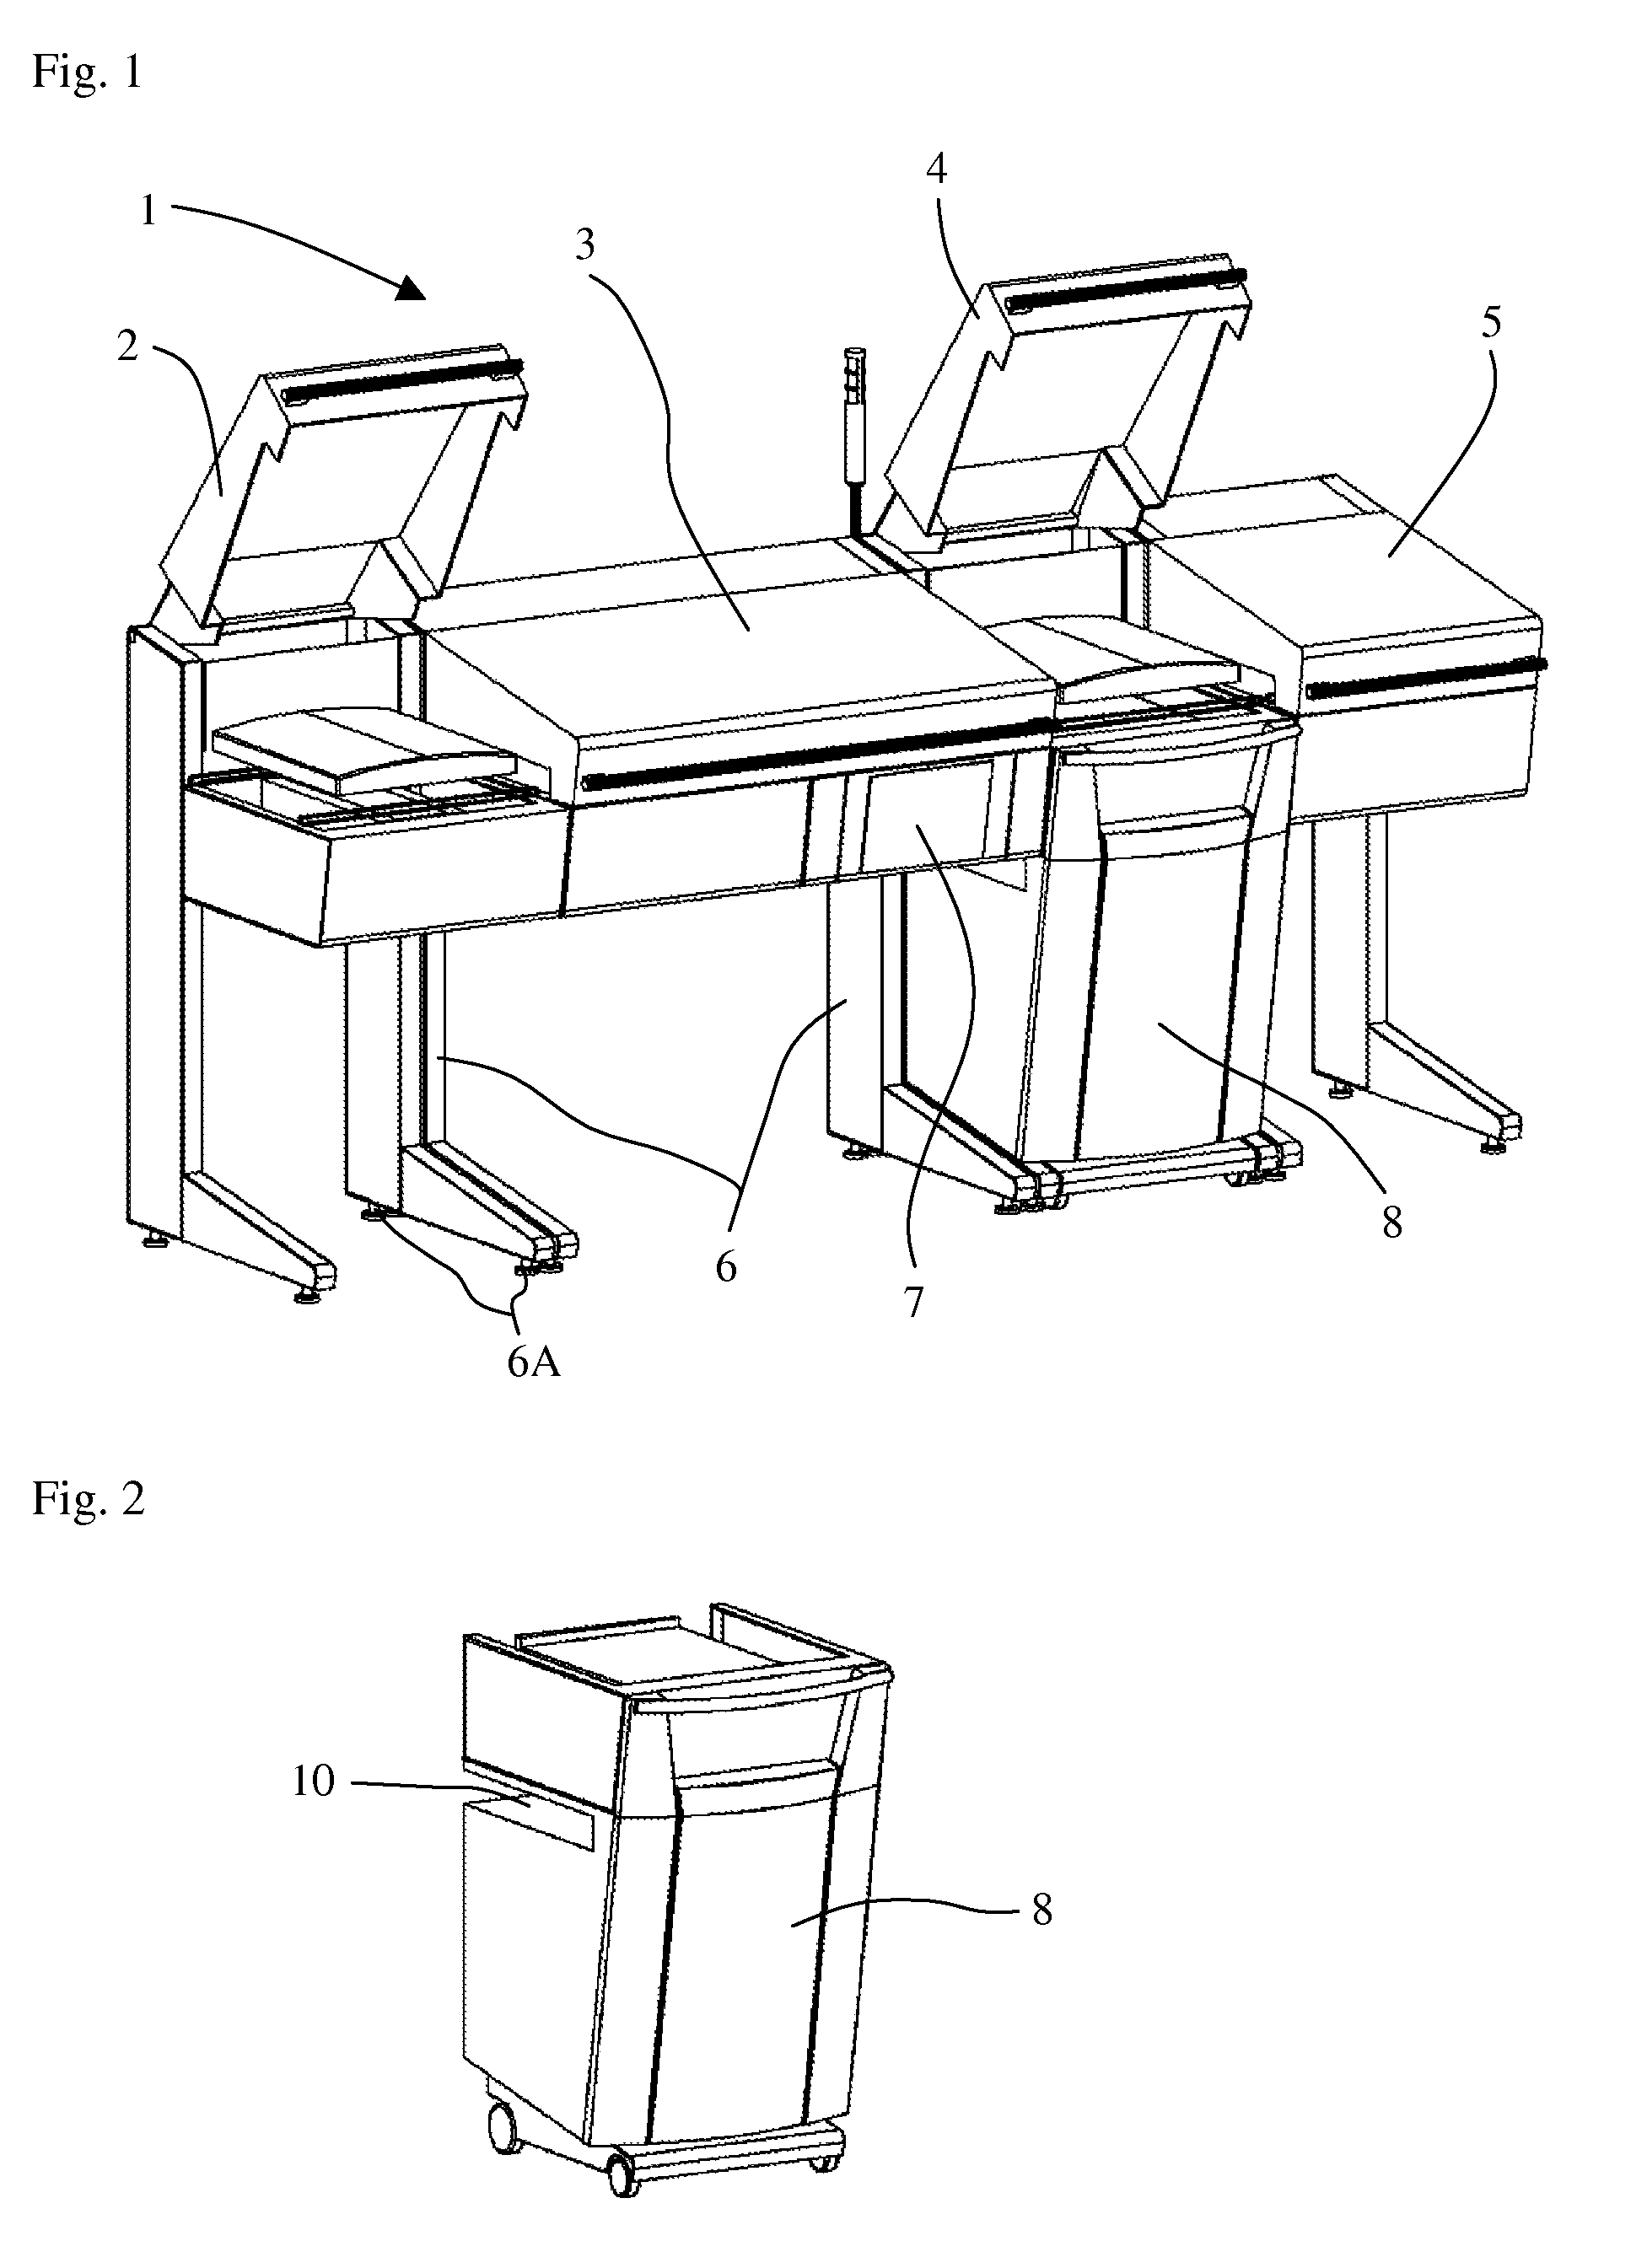 Soldering machine comprising a soldering module and at least one soldering station that is mobile and exchangeable insertable into the soldering module